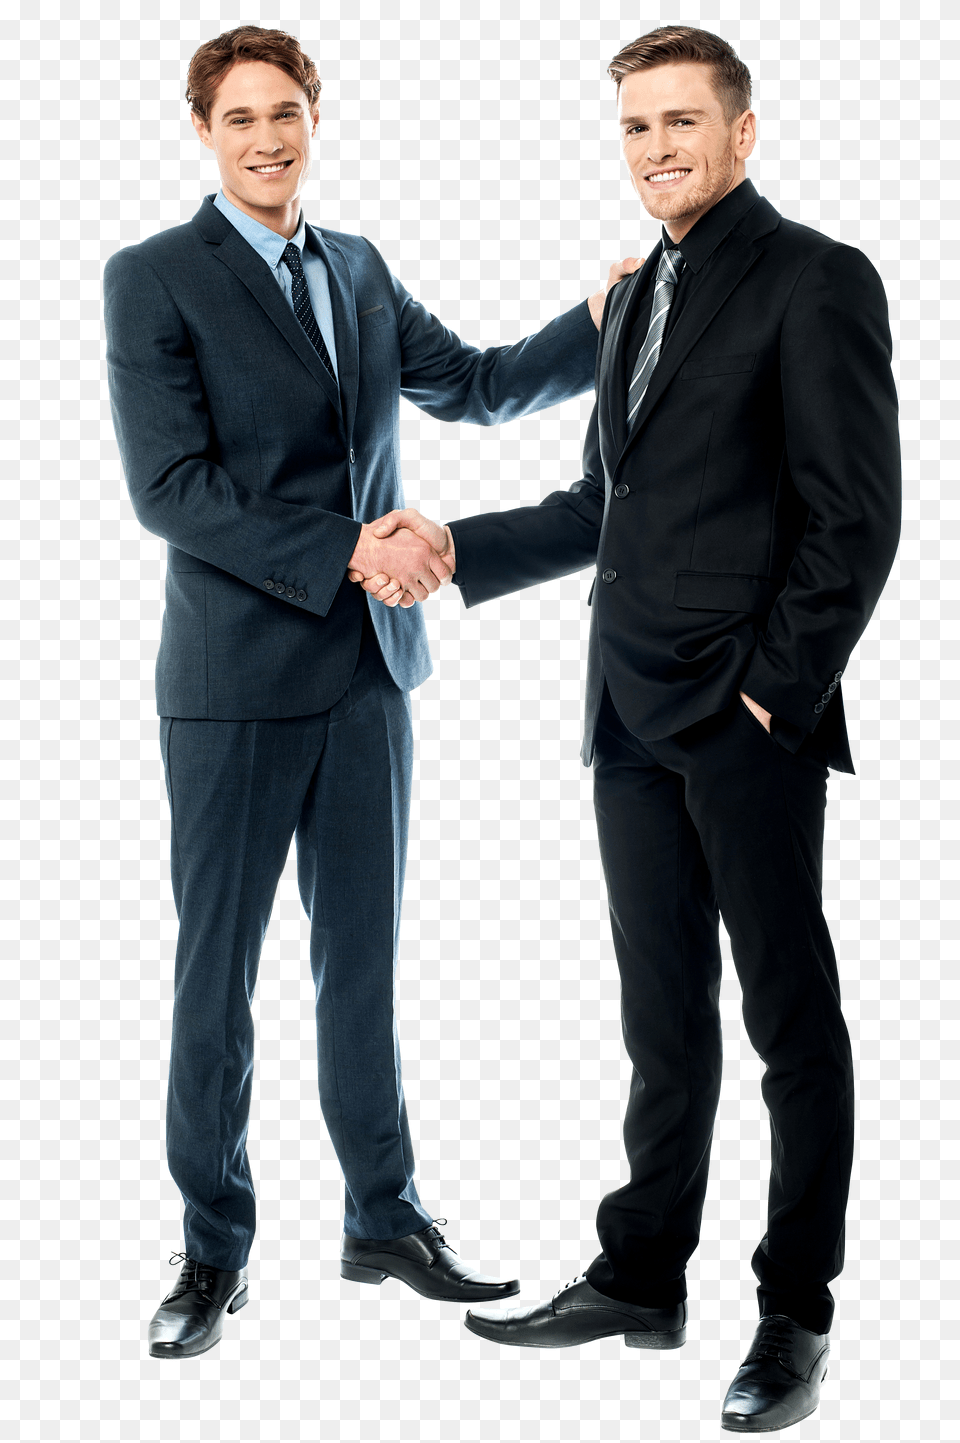 Business Handshake Business People Shaking Hands Png